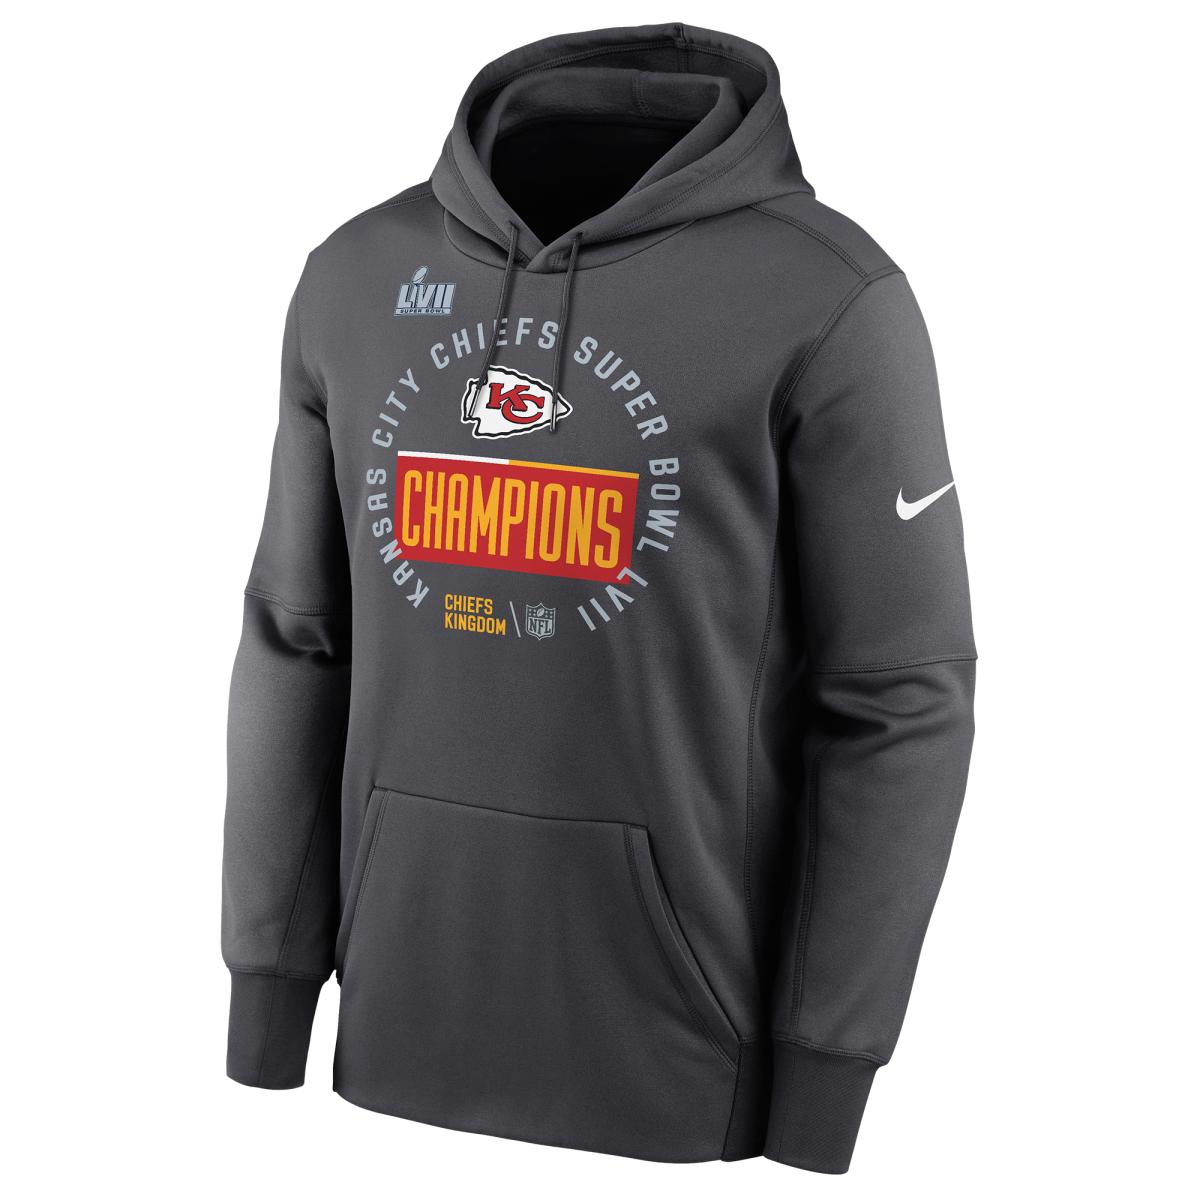 Kansas City Chiefs Trophy Collection Hoodie - $84.99